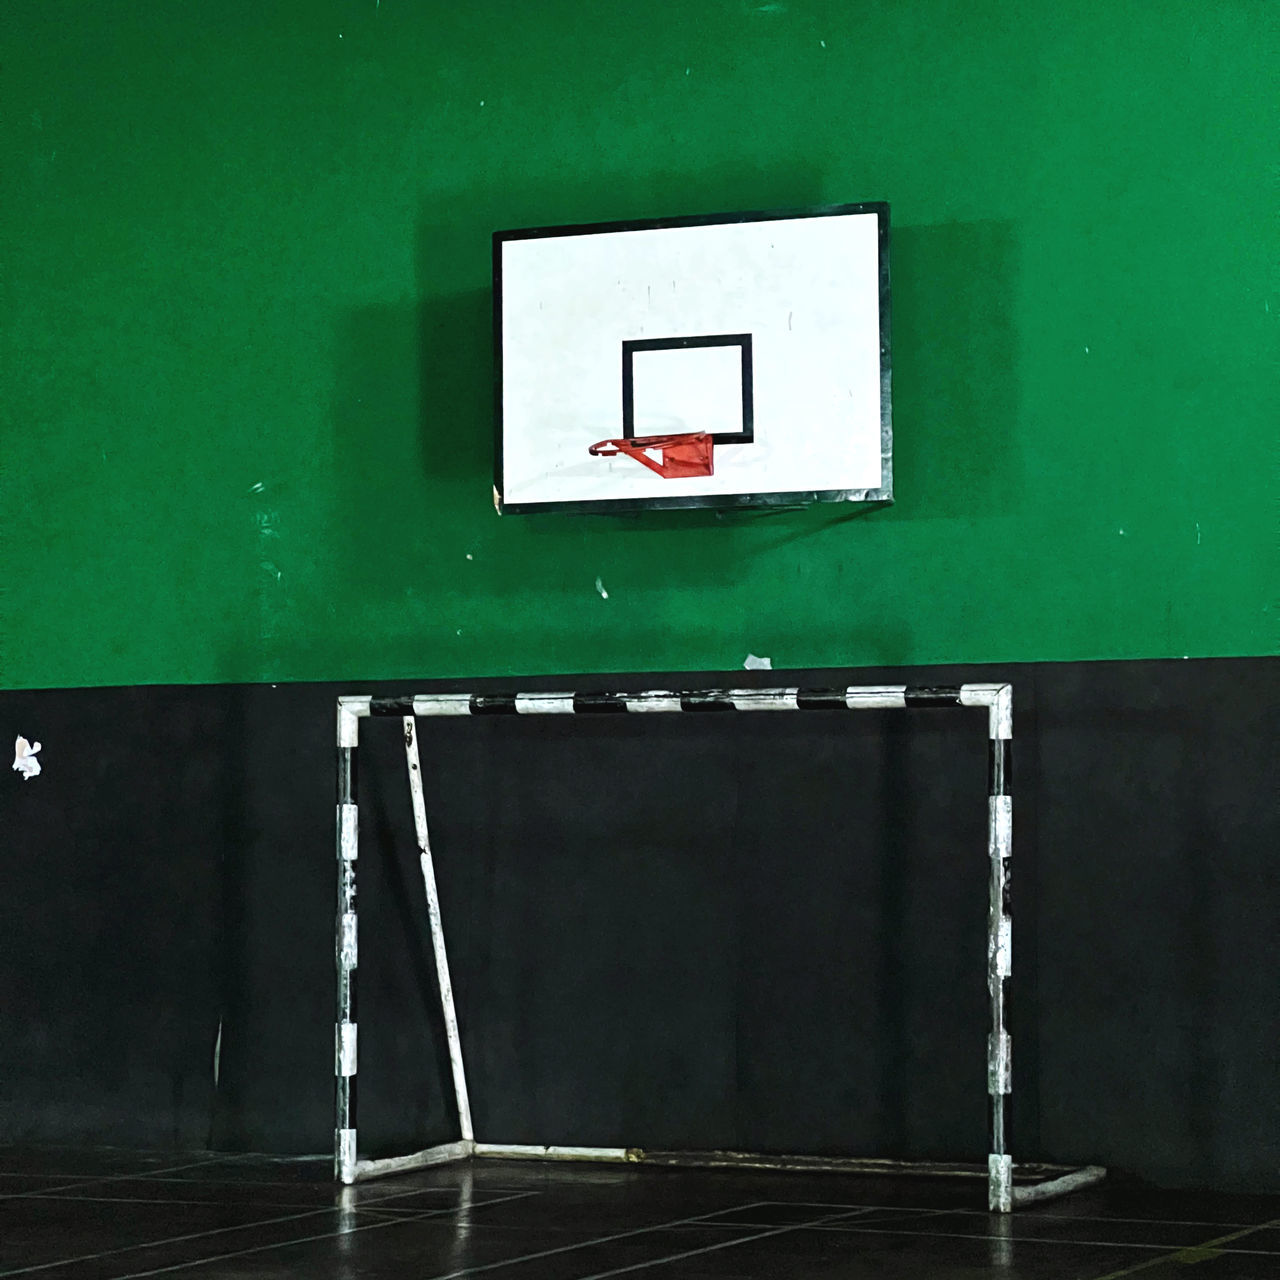 basketball, wall, green, no people, sports, room, blackboard, basketball hoop, architecture, indoors, board, wall - building feature, light, sport venue, display device